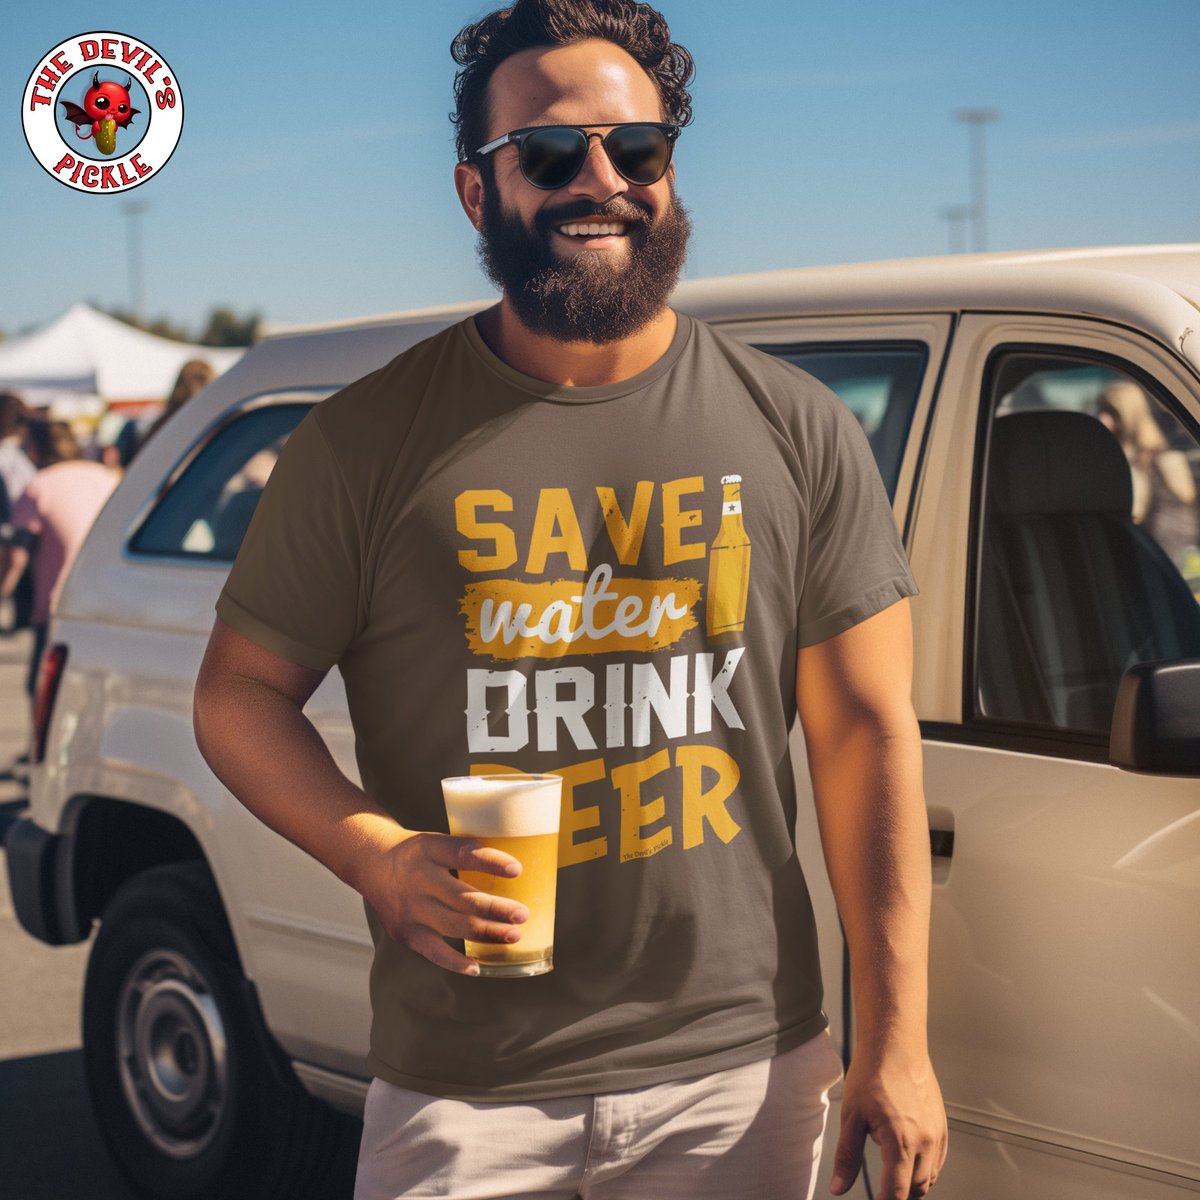 Join the movement and save water...by drinking beer! The Best Beer & Booze Drinking Tees, Period!

#cheers #funshirts #adulthumor #freeshipping #adultmeme #thedevilspickle #byob #ThirstyThursday #beeroclock #beerandbooze #beerdrinking #SipSipHooray #whiskeyoclock #beertshirts